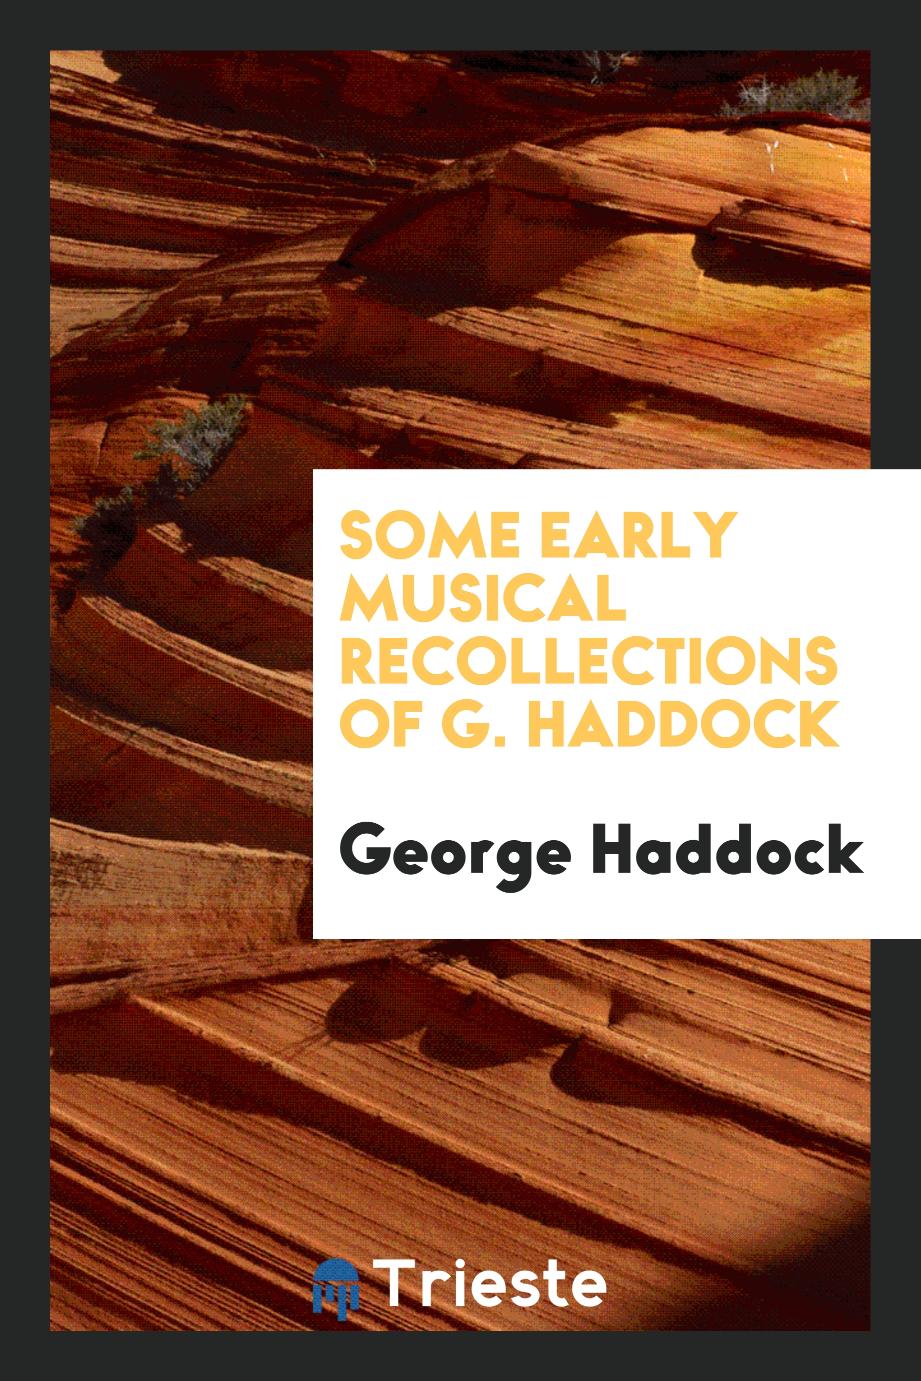 Some Early Musical Recollections of G. Haddock